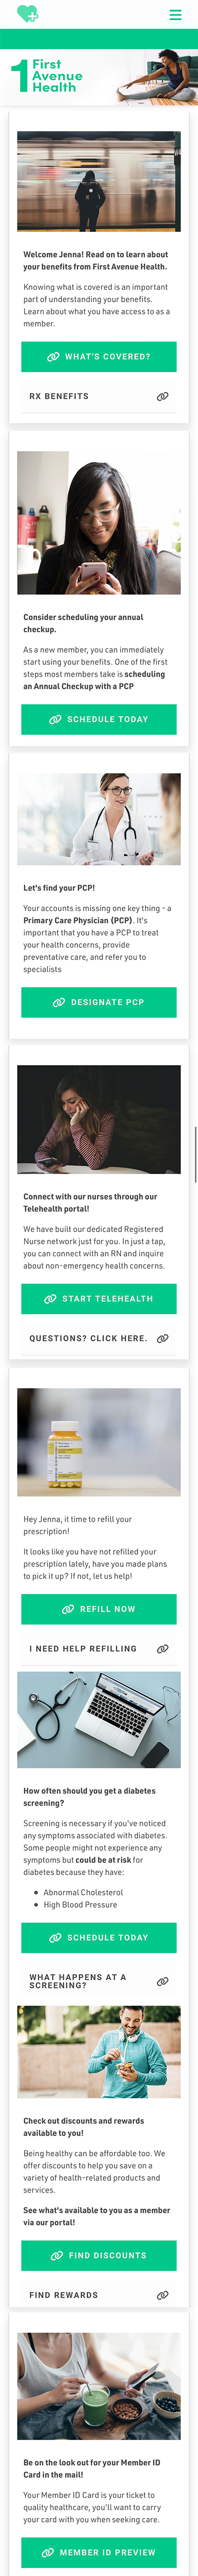 A personalized Relay Feed showing content for a member of a health plan.